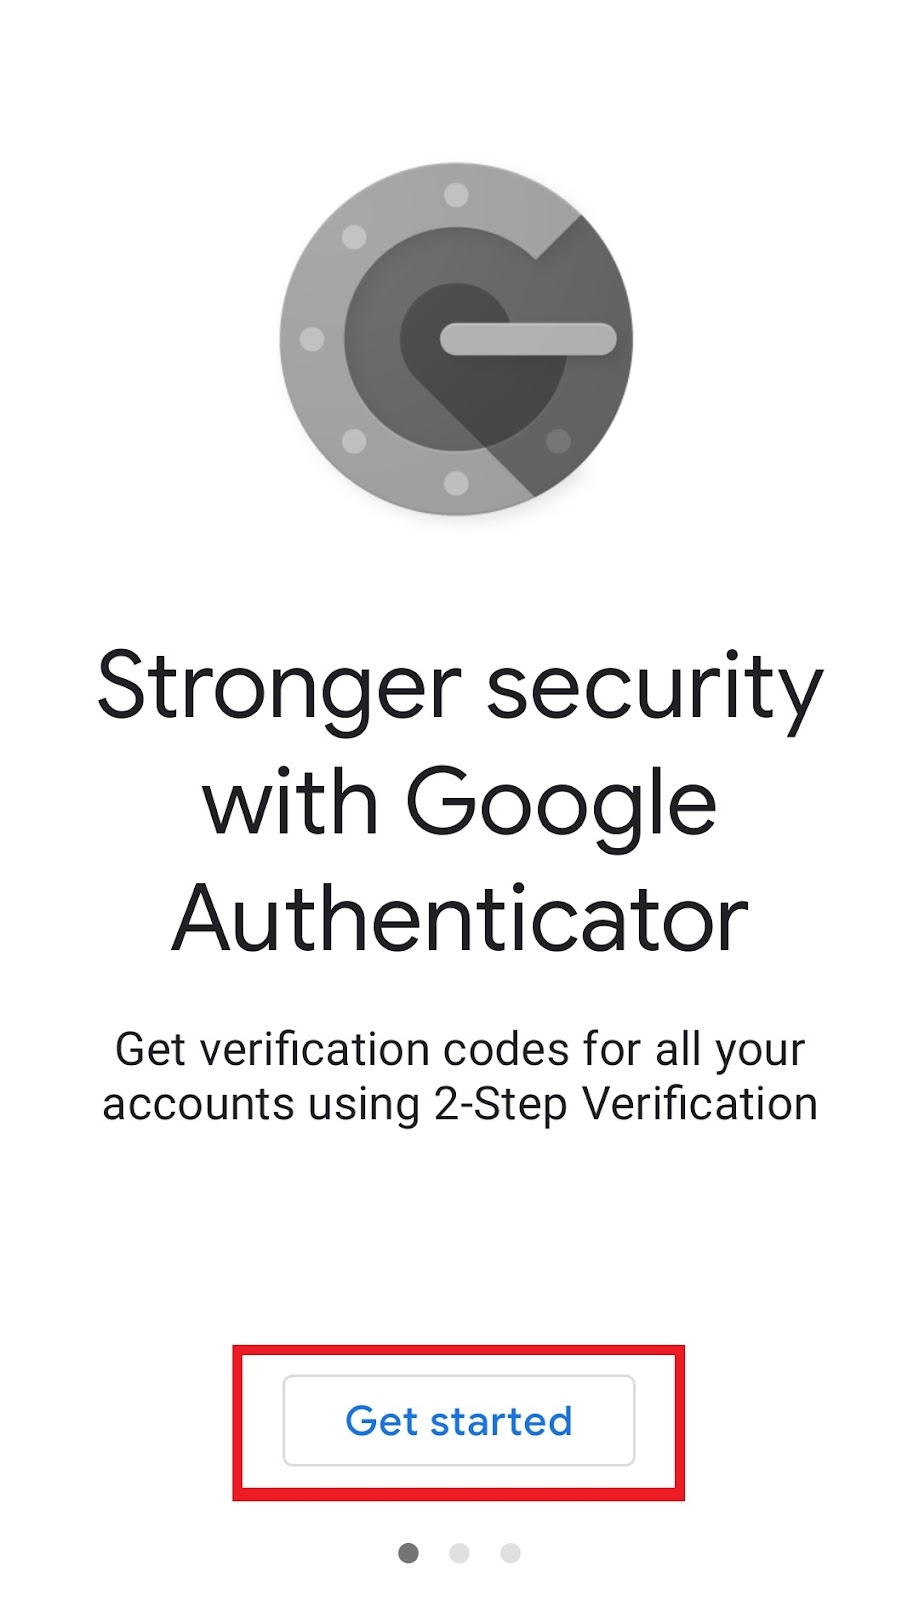 How To Transfer Google Authenticator To A New Phone